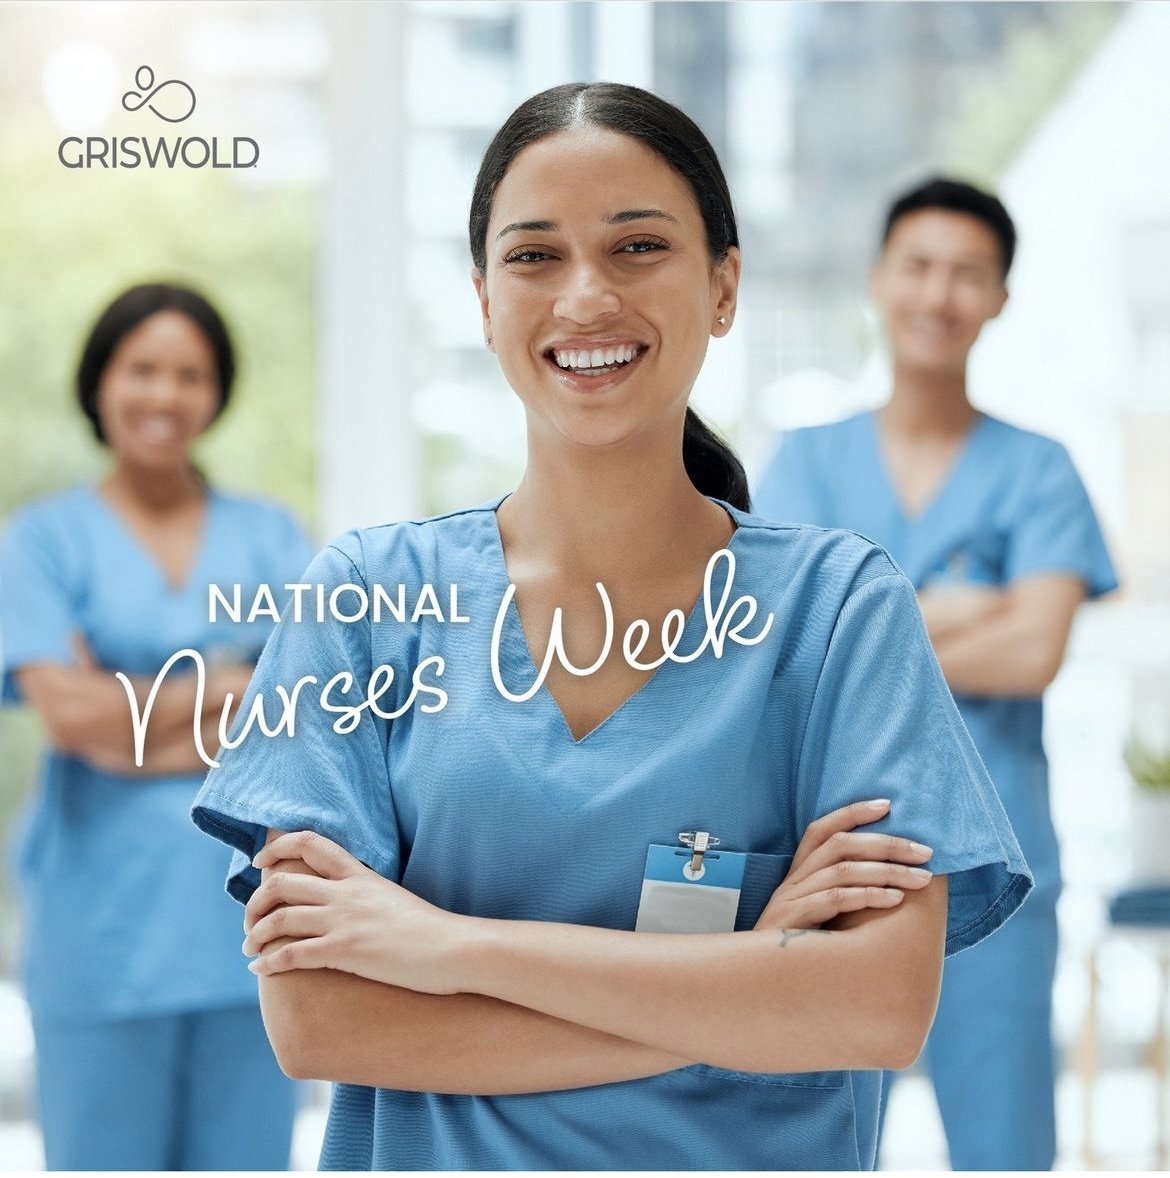 🎉 Happy Nurses Week! 🎉

👩‍⚕️ Let's take a moment to celebrate our incredible nurses who are the heartbeat of healthcare! 👨‍⚕️

This Nurses Week, we want to express our deepest gratitude to Cindy, our remarkable nurse at Griswold. Her dedication, compassion, and...